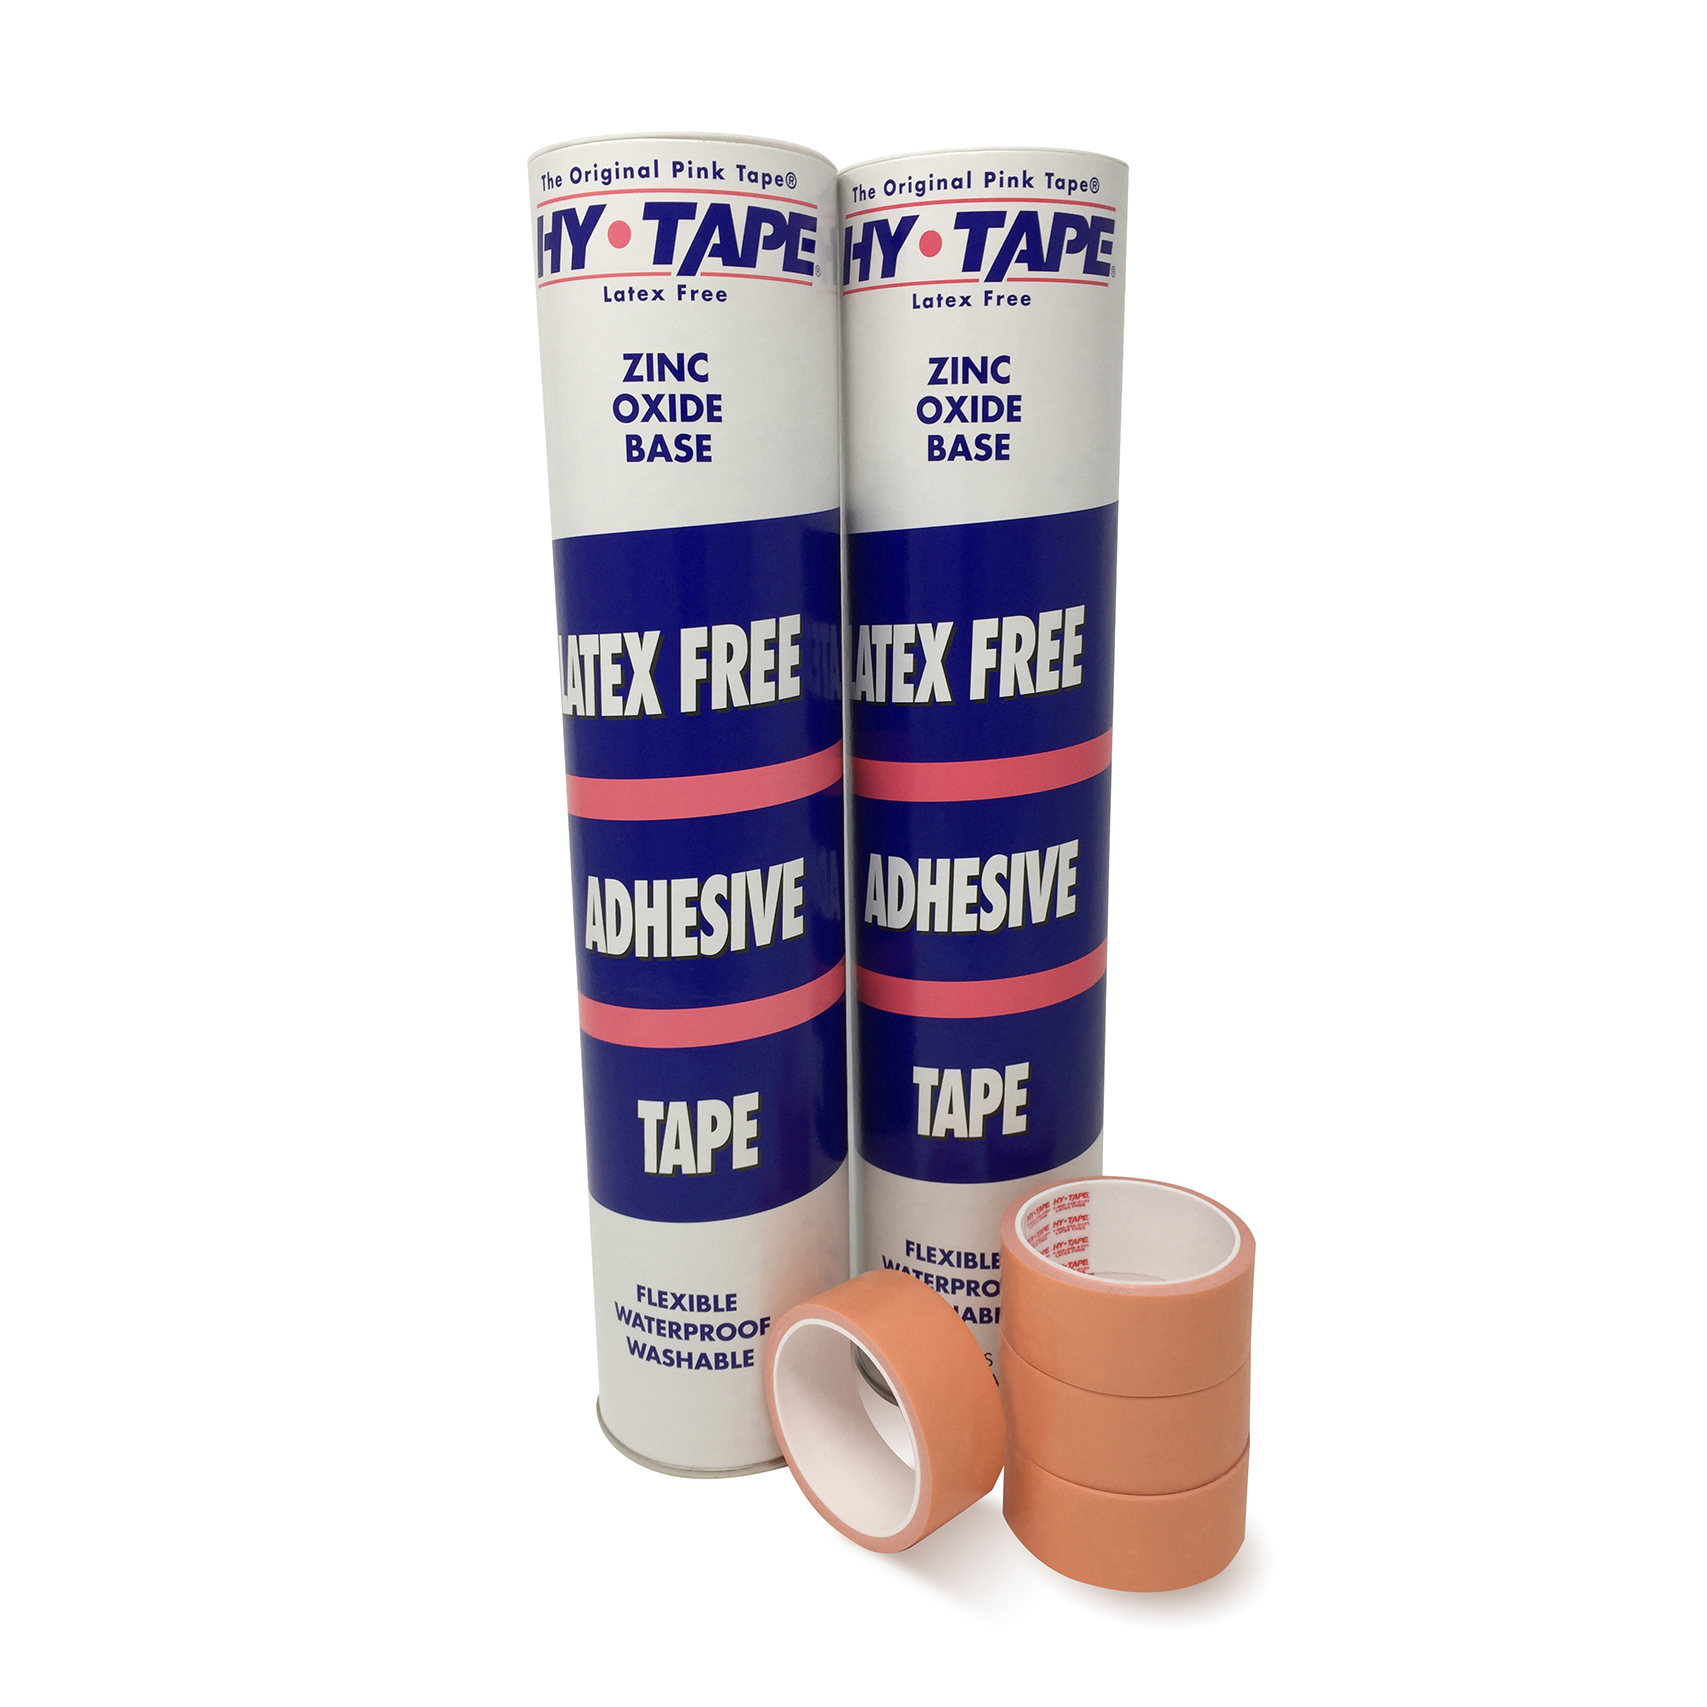 Lakewood Products Infant Measuring Tapes - Tyvek 60 (150 cm